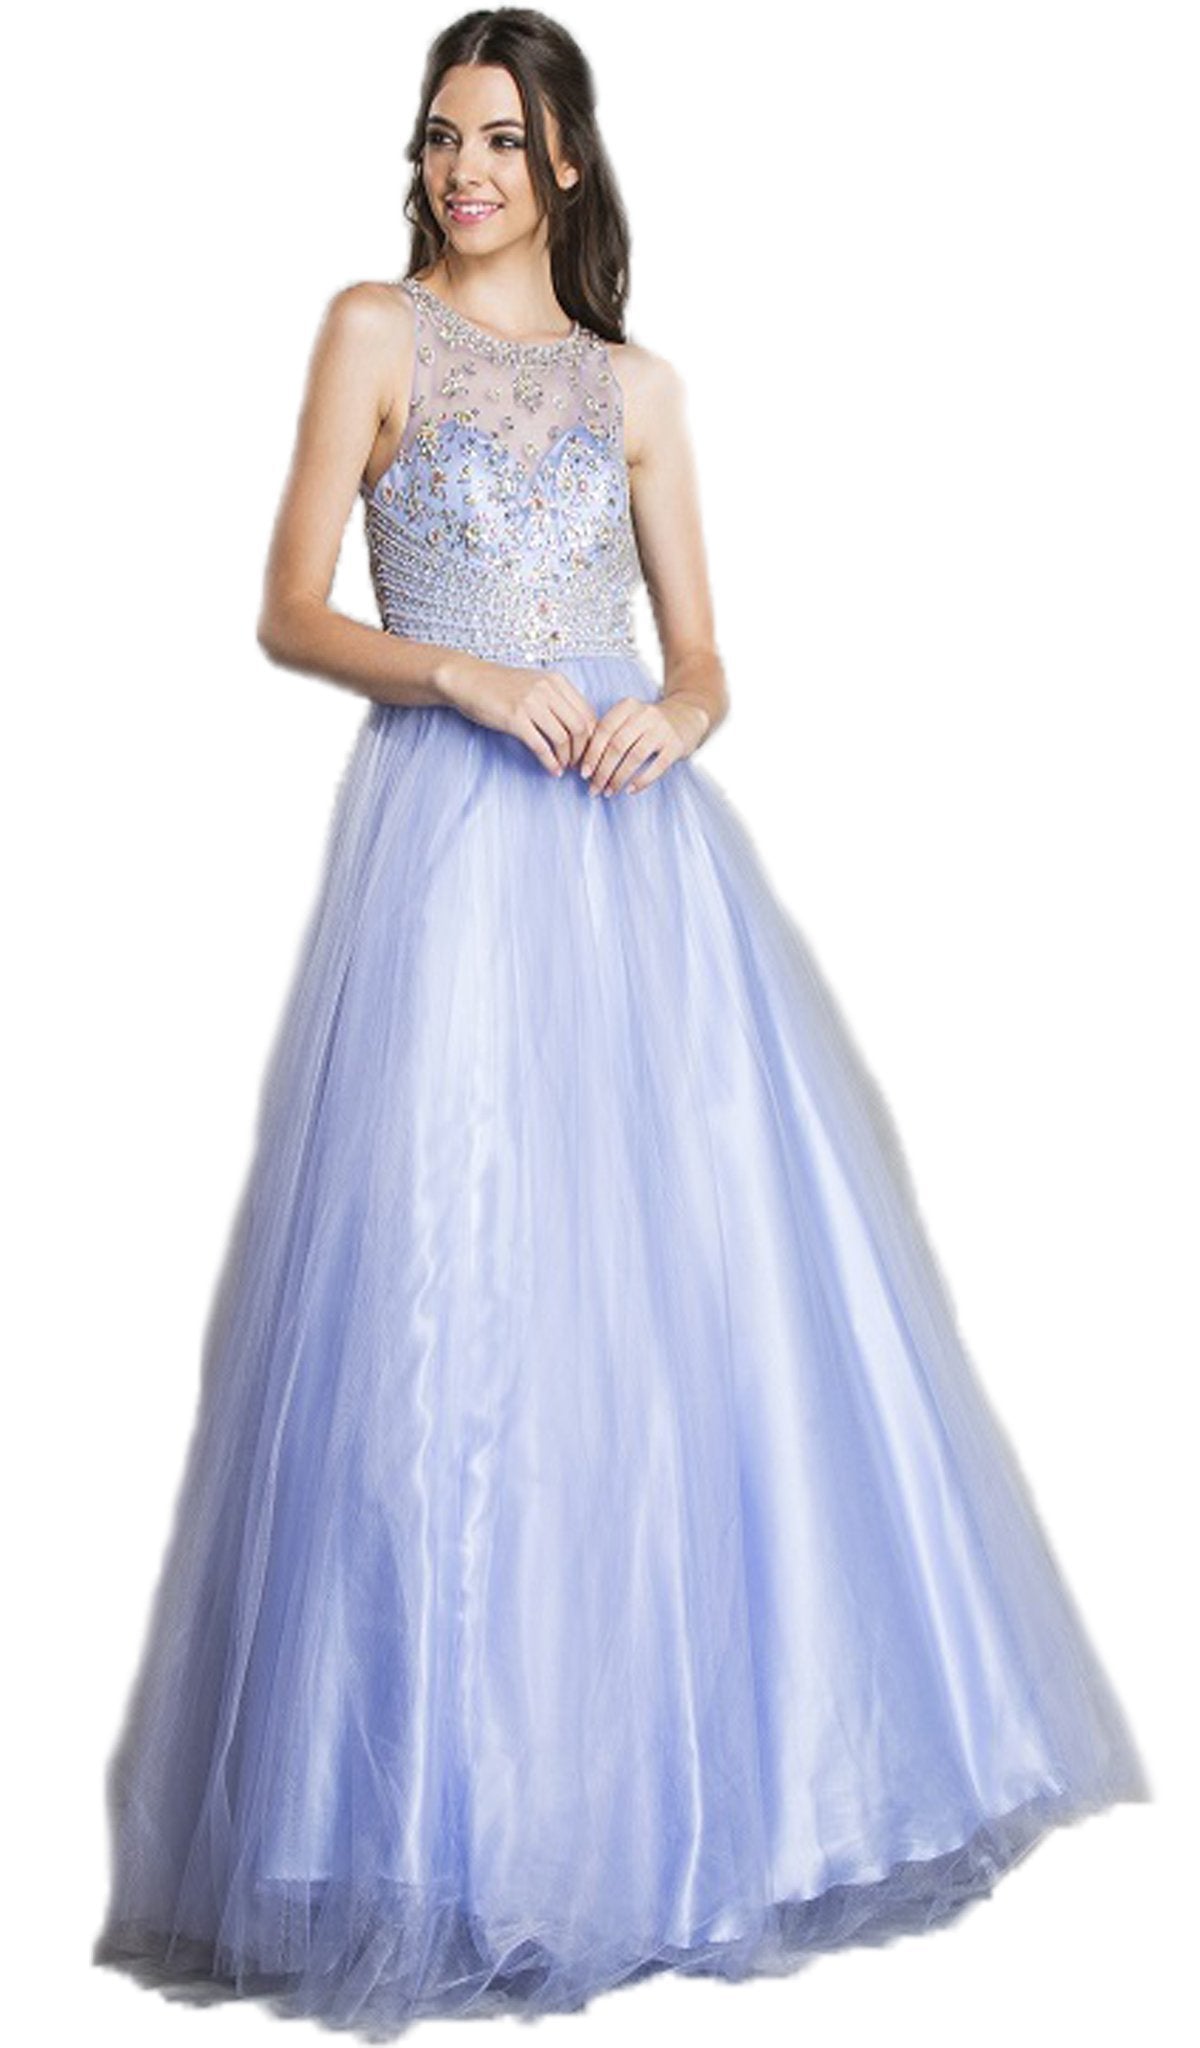 Aspeed Design - Embellished Illusion Jewel Evening Gown
